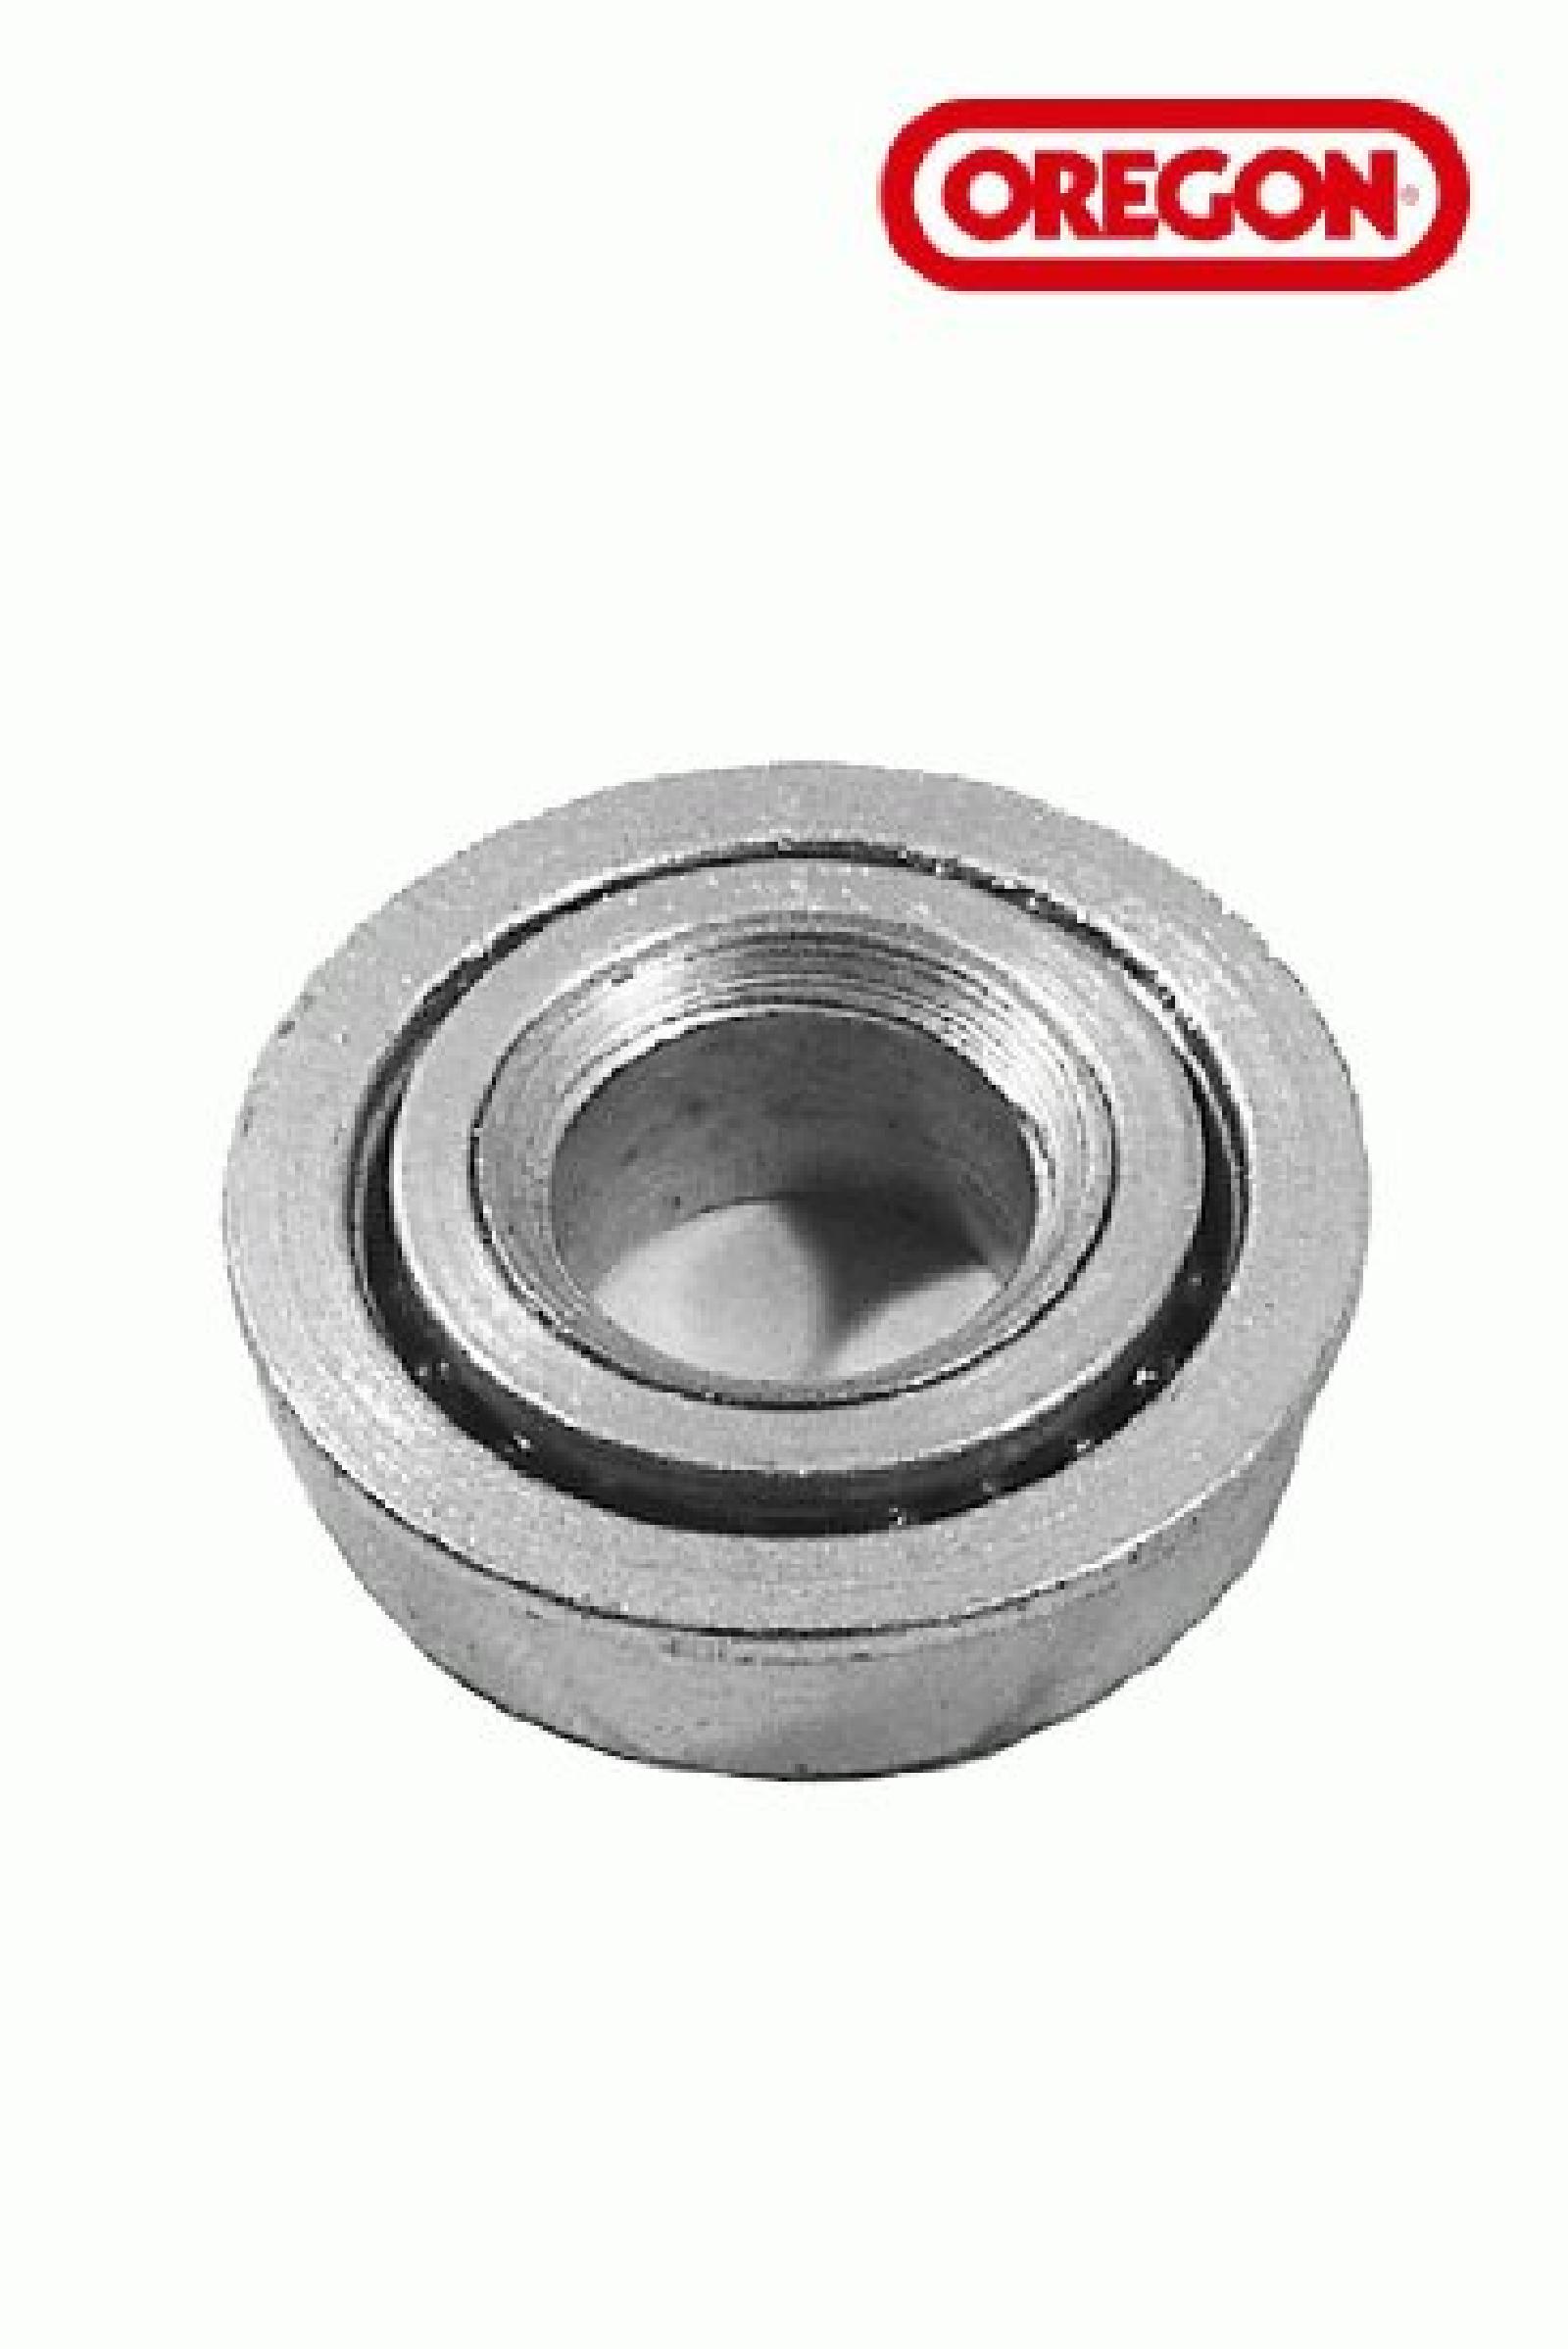 BEARING, BALL 5/8IN X 1 3 part# 45-258 by Oregon